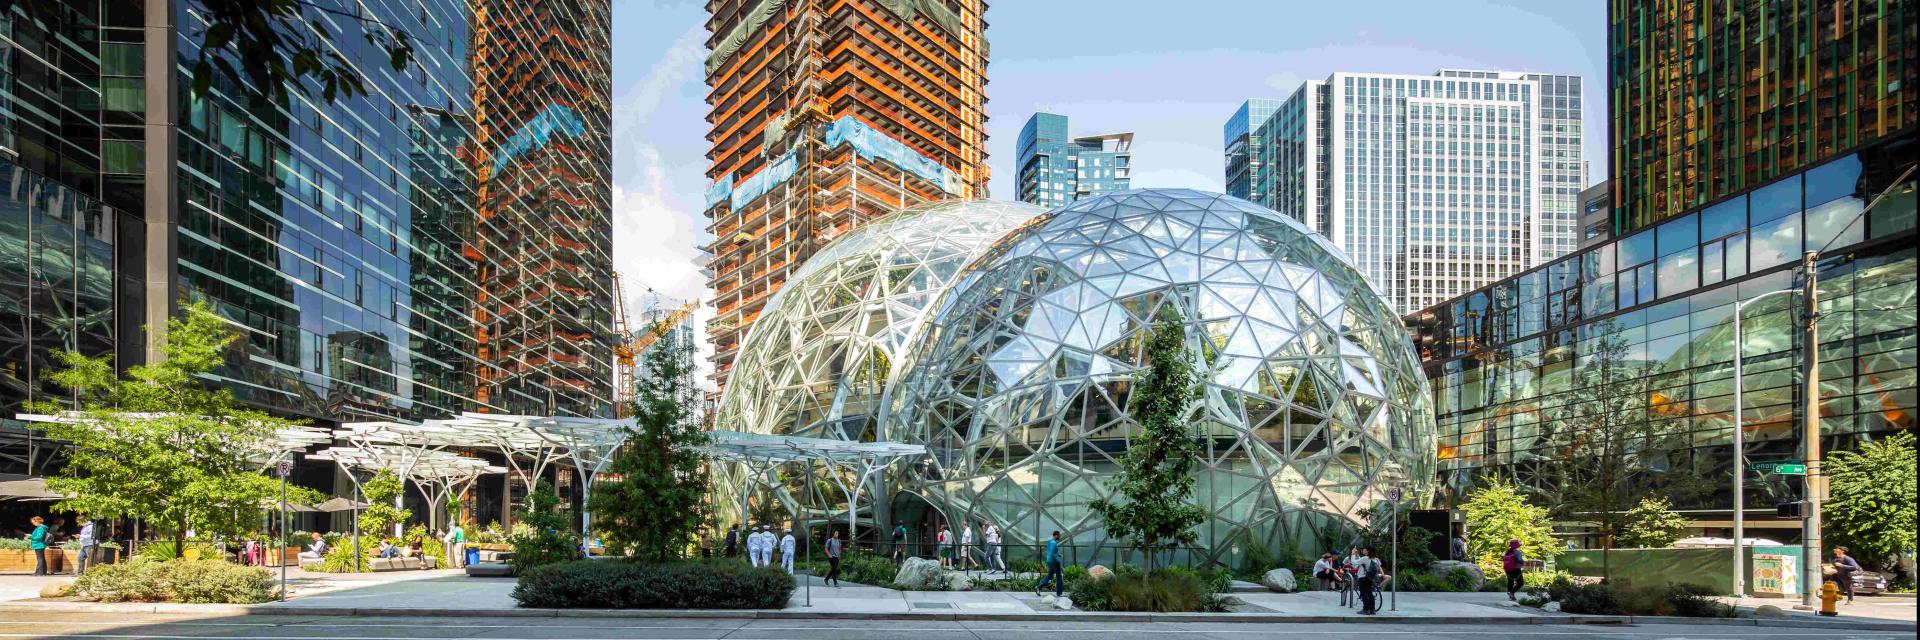 The Spheres building in Seattle is built with ECOPlanet low-carbon cement with 80% less CO2 inside.